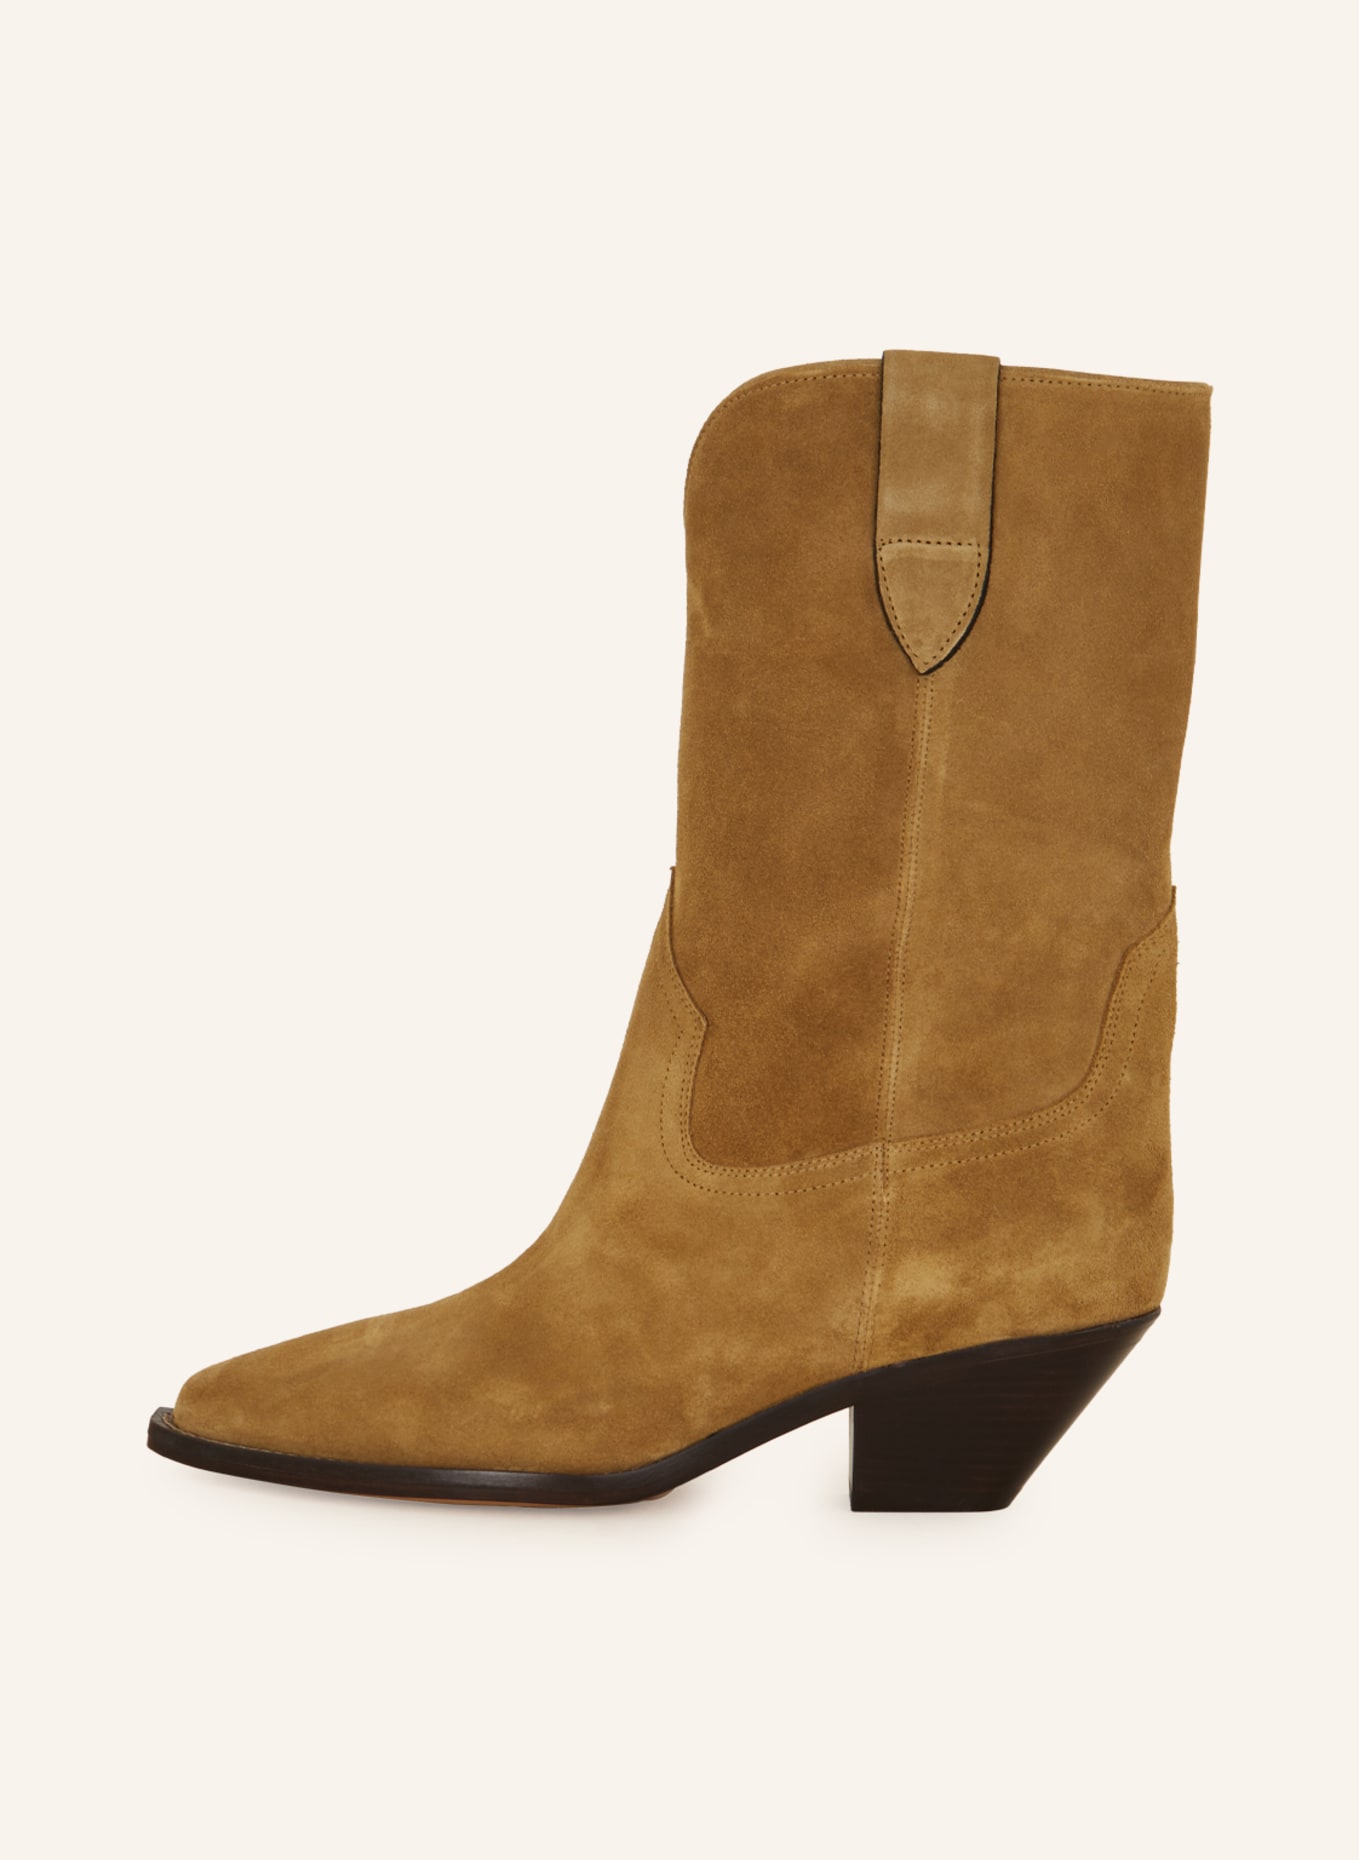 ISABEL MARANT Cowboy Boots DAHOPE, Farbe: TAUPE (Bild 4)